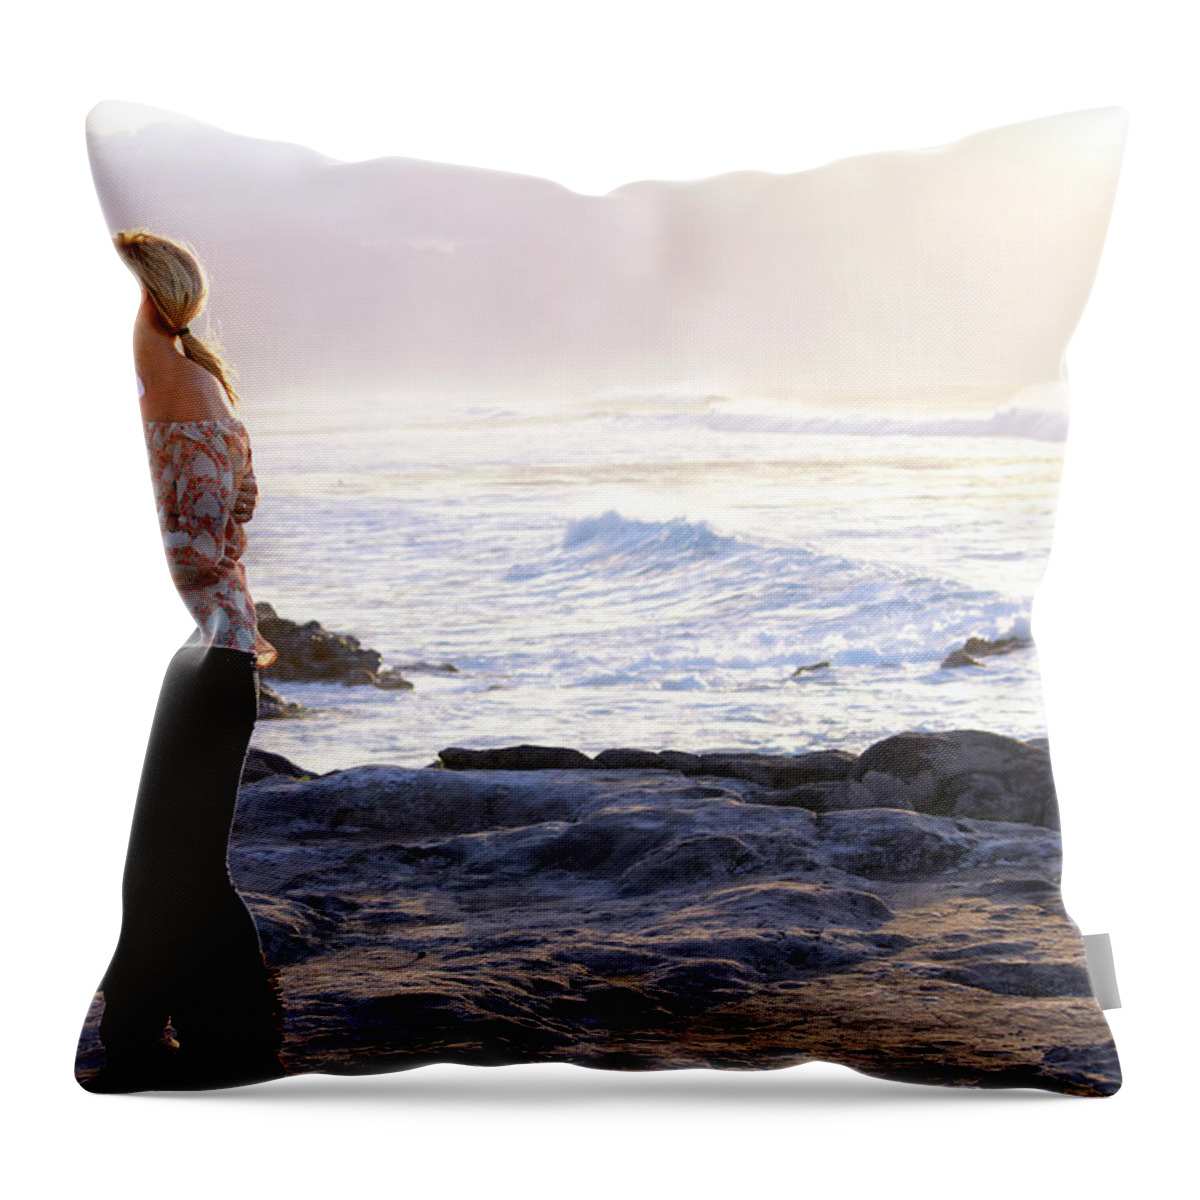 Couple Throw Pillow featuring the photograph Kissed by the Ocean by Dawn Eshelman